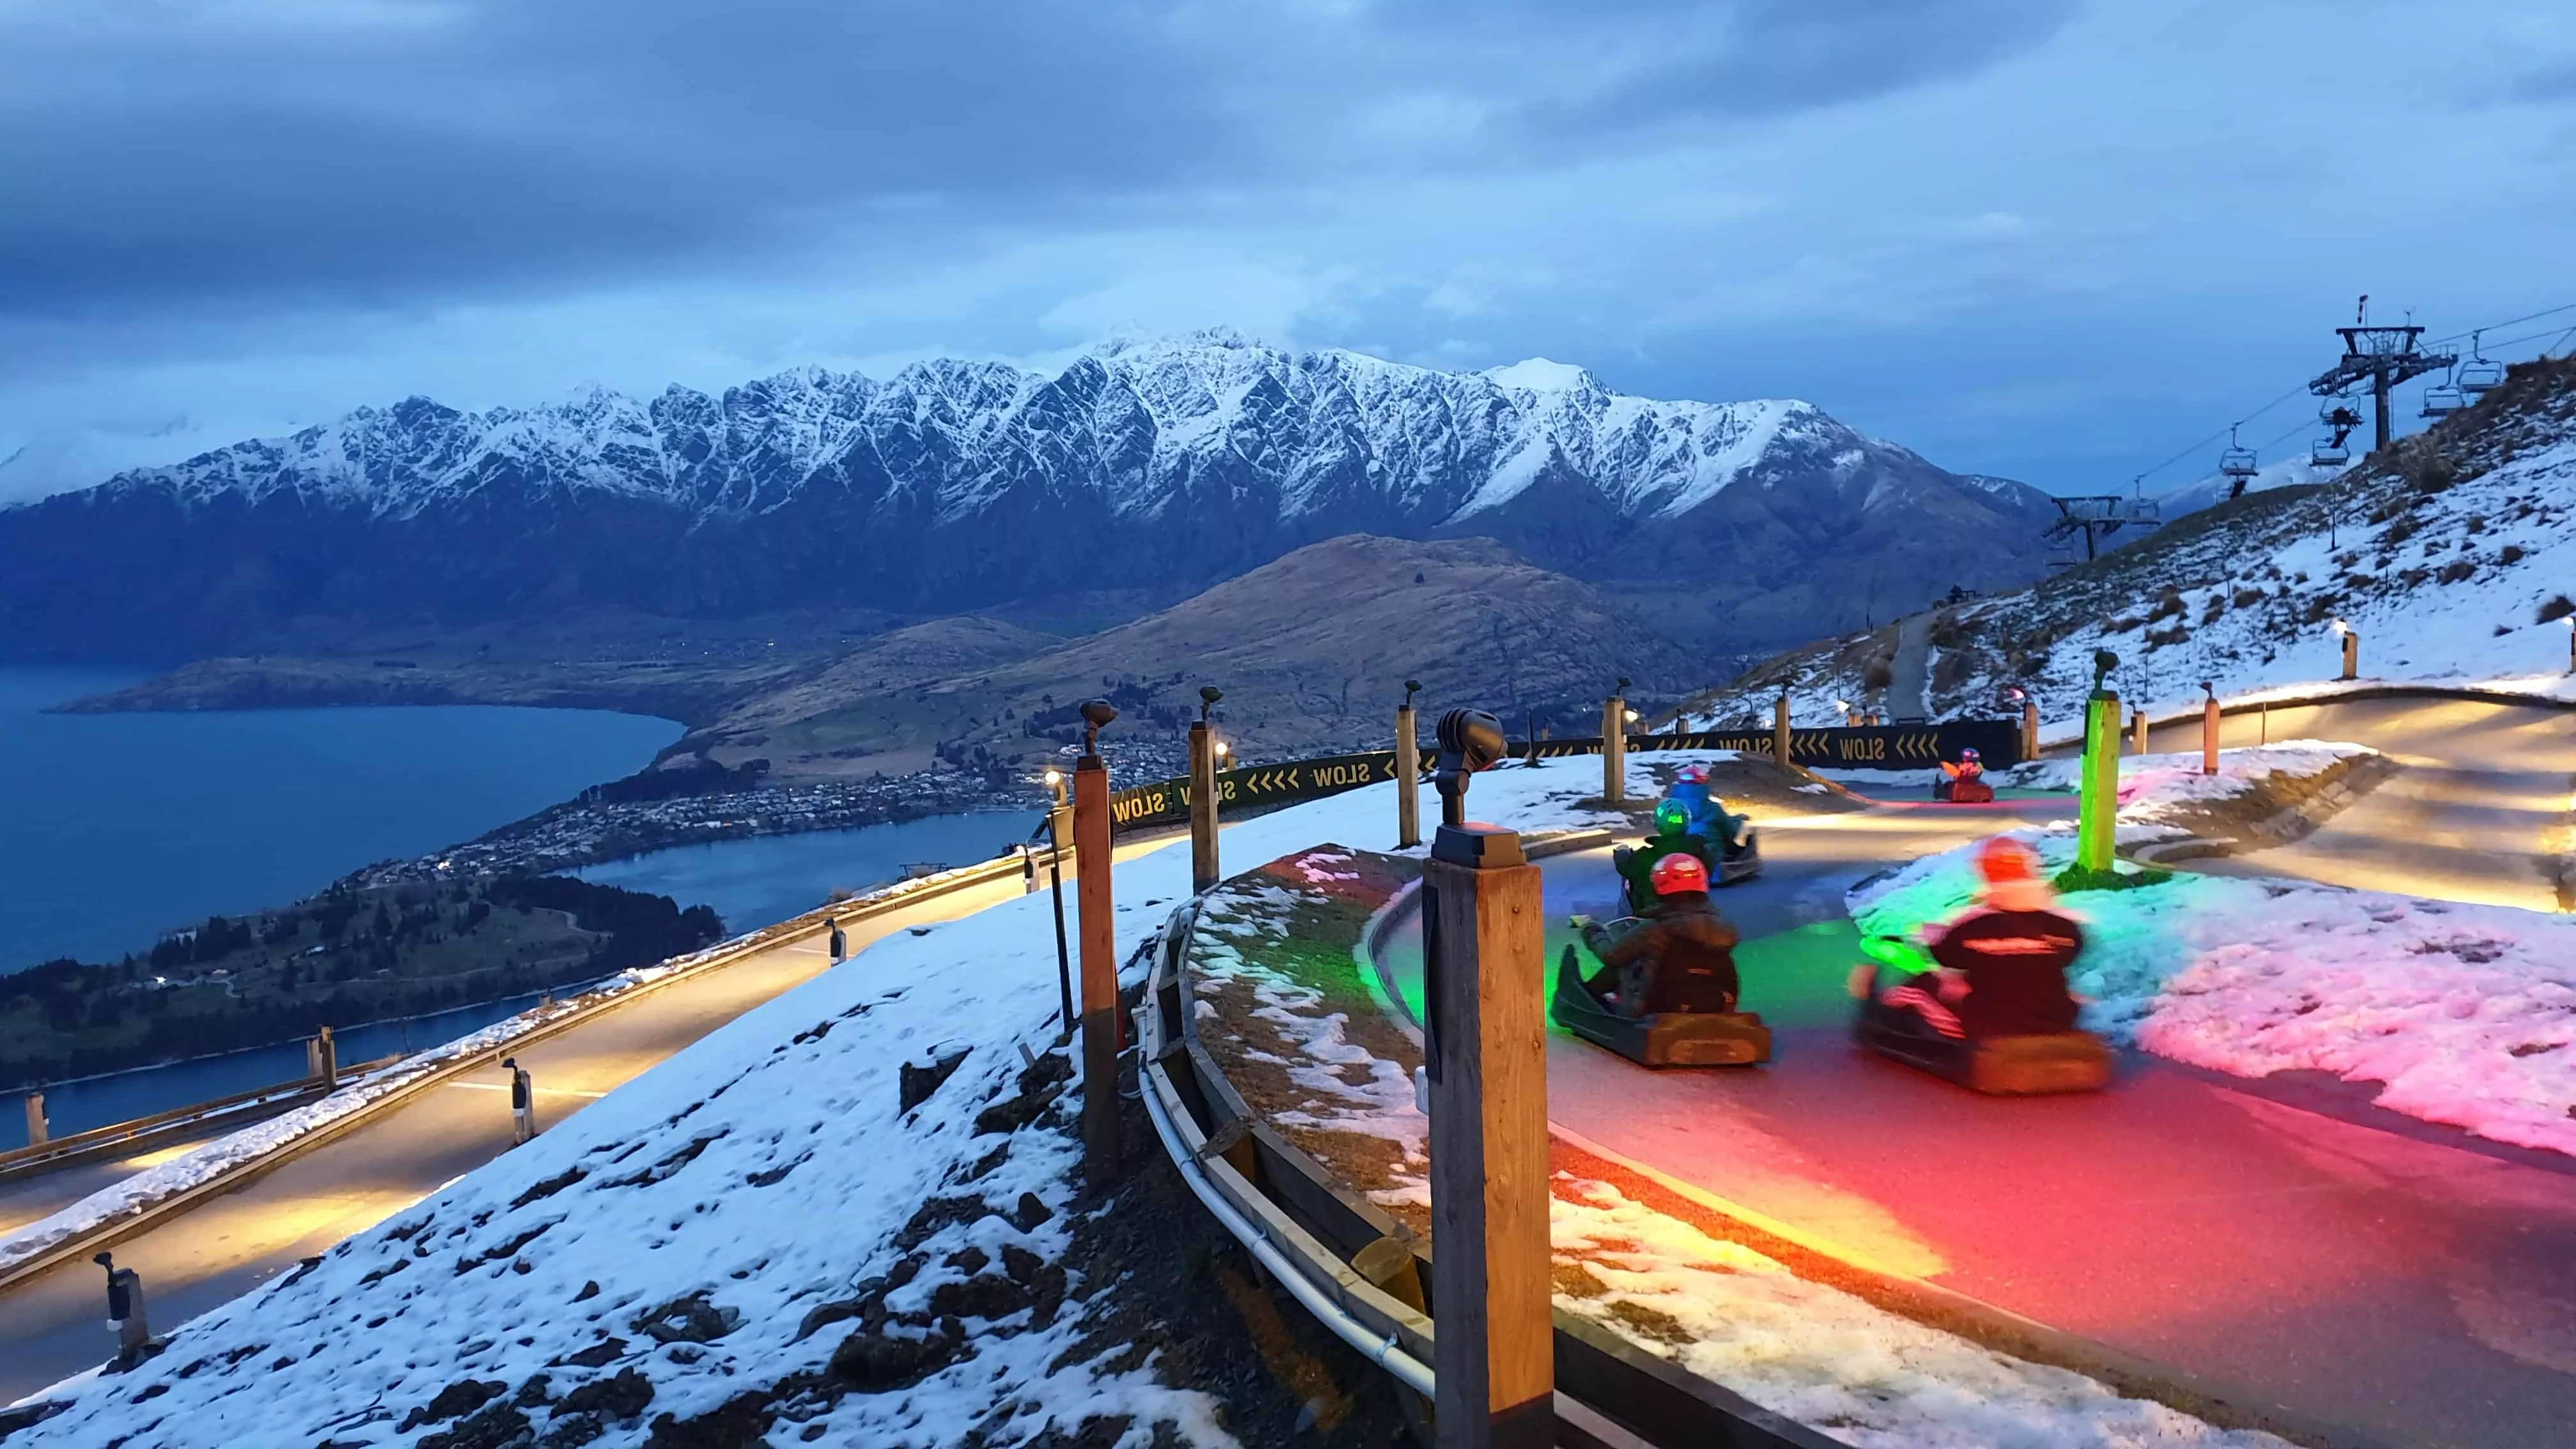 Queenstown Luge in New Zealand, Australia and Oceania | Sledding - Rated 4.2